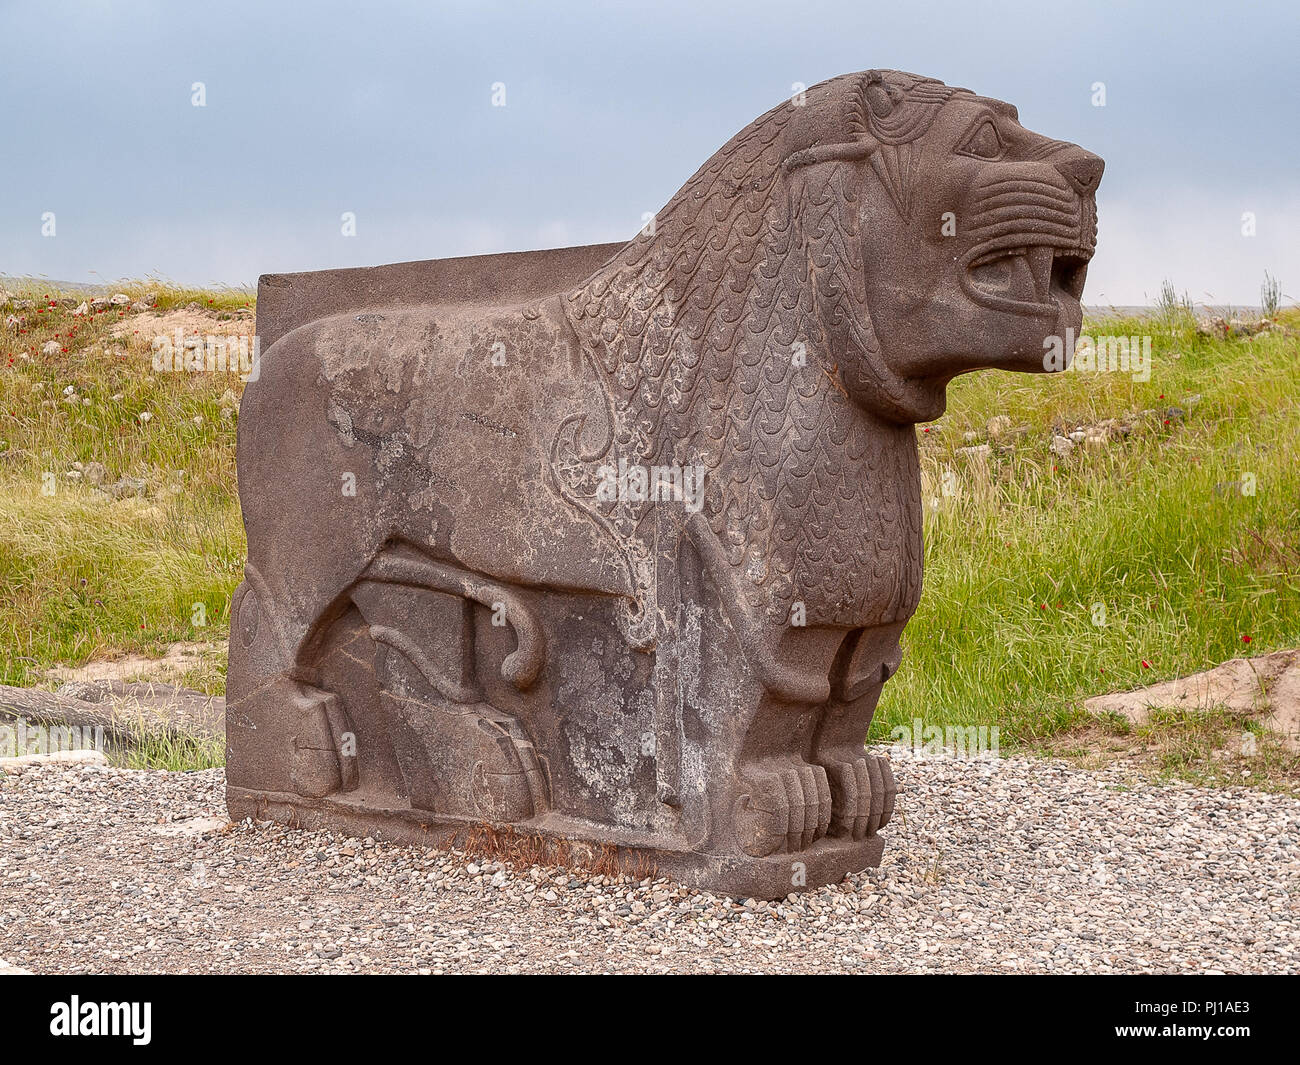 Remains of Syro-Hittite Ain Dara temple (1300 - 740 BC) are located in northern Syria, 67 kilometers northwest of Aleppo near the Turkish border. Stock Photo